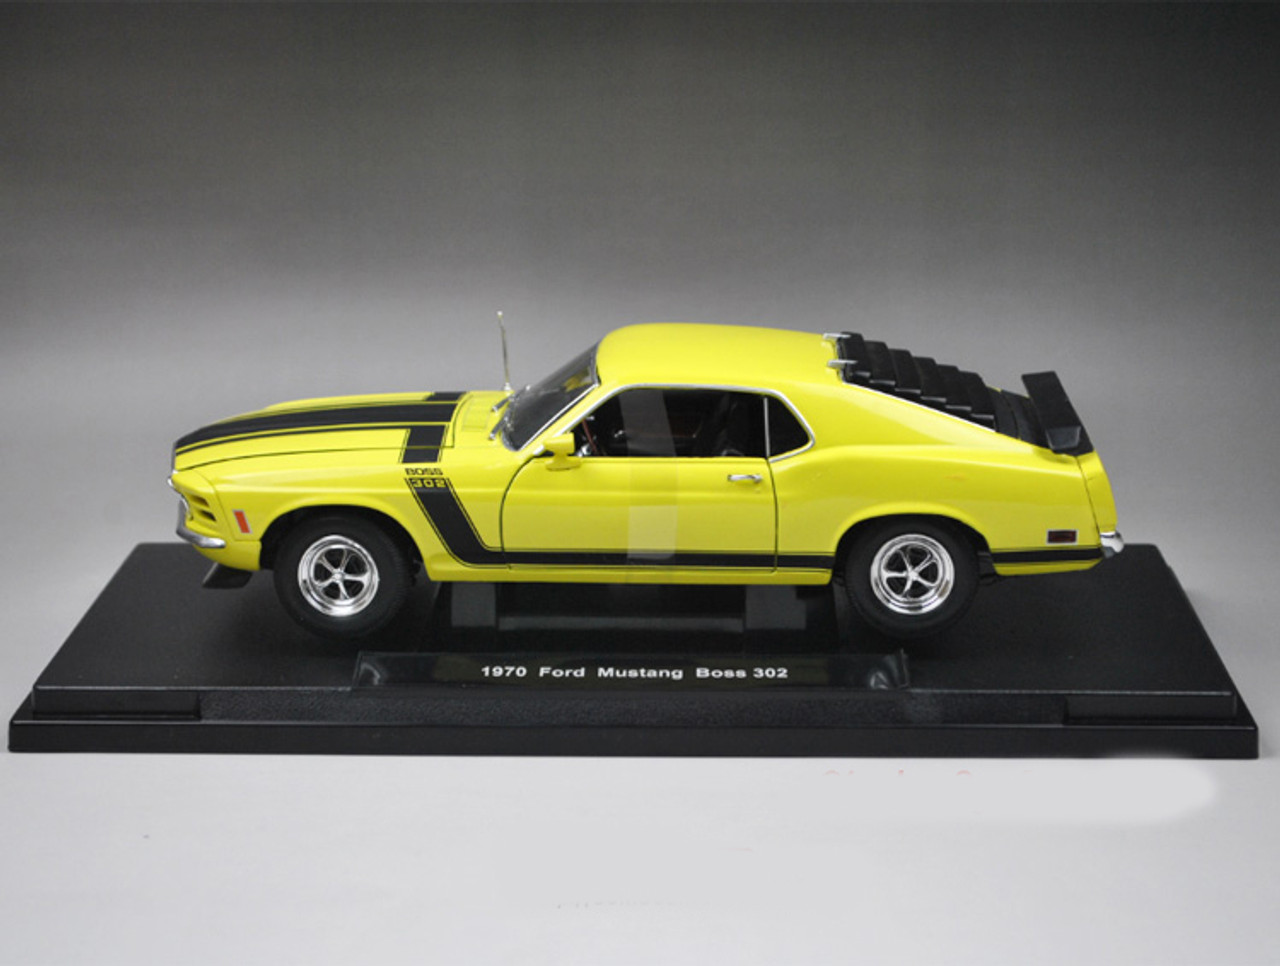 1/18 Welly 1970 Ford Mustang Boss 302 (Yellow) Diecast Car Model 